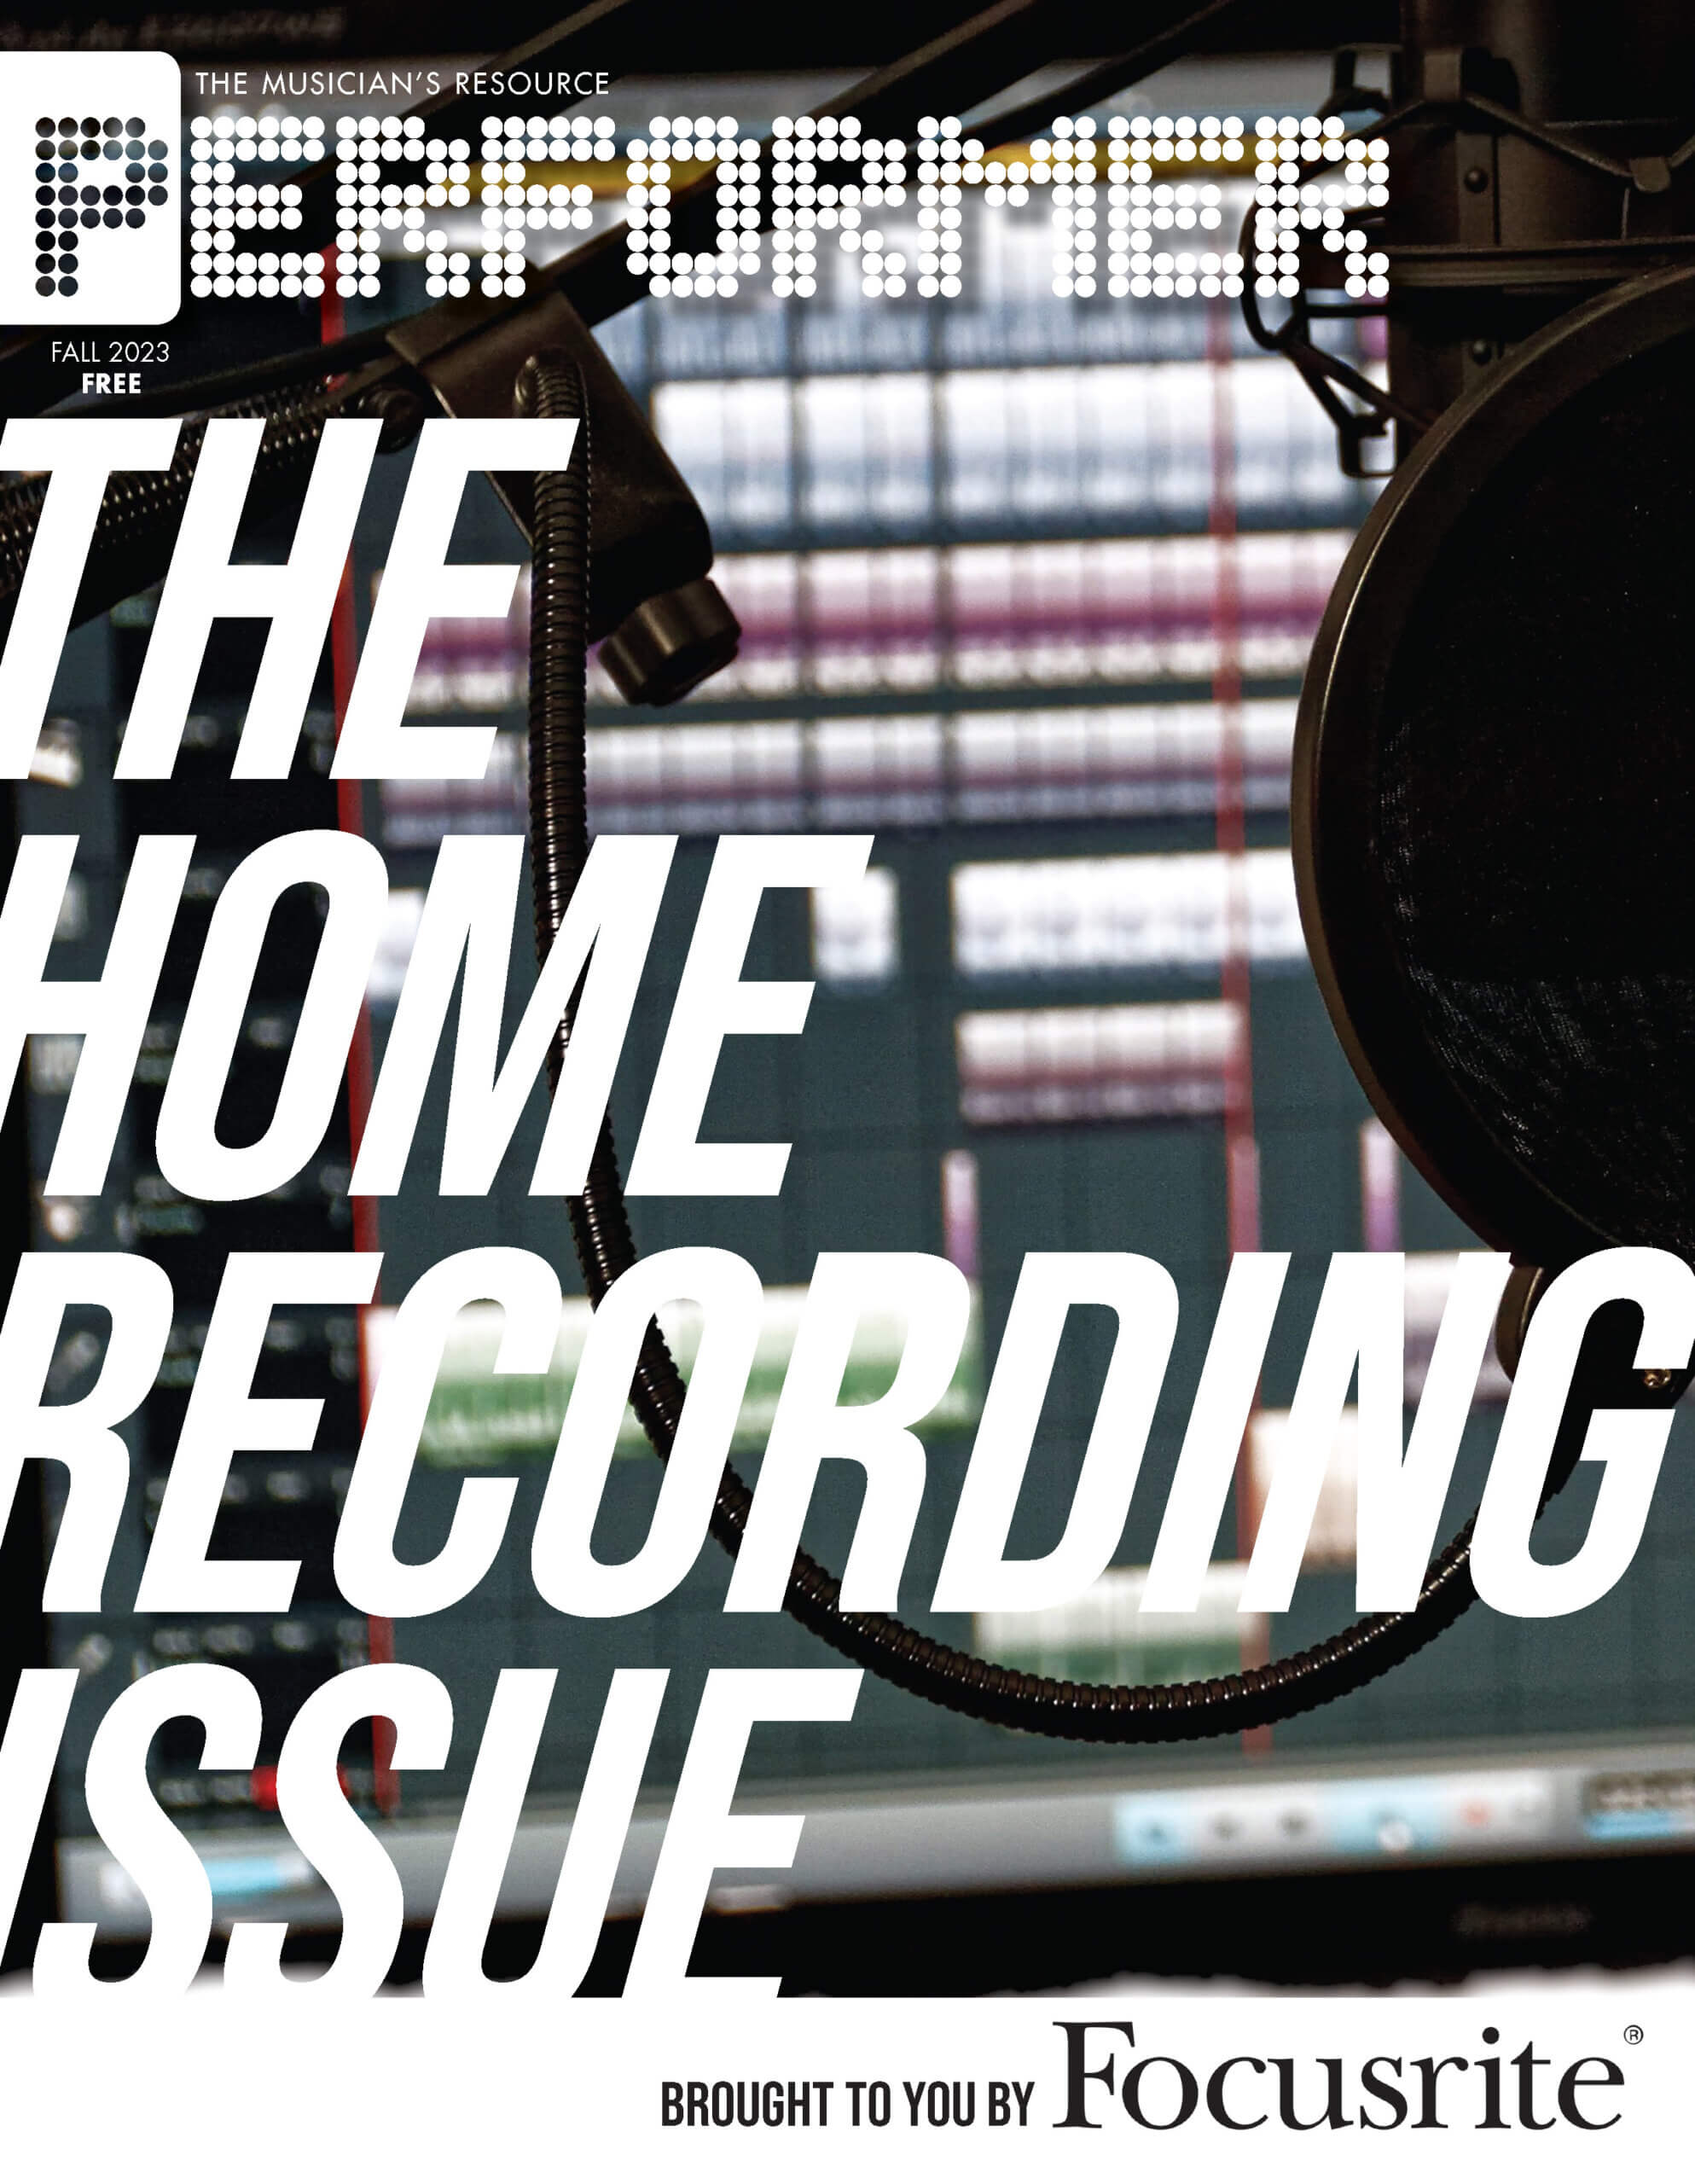 The HOME RECORDING ISSUE is out now!